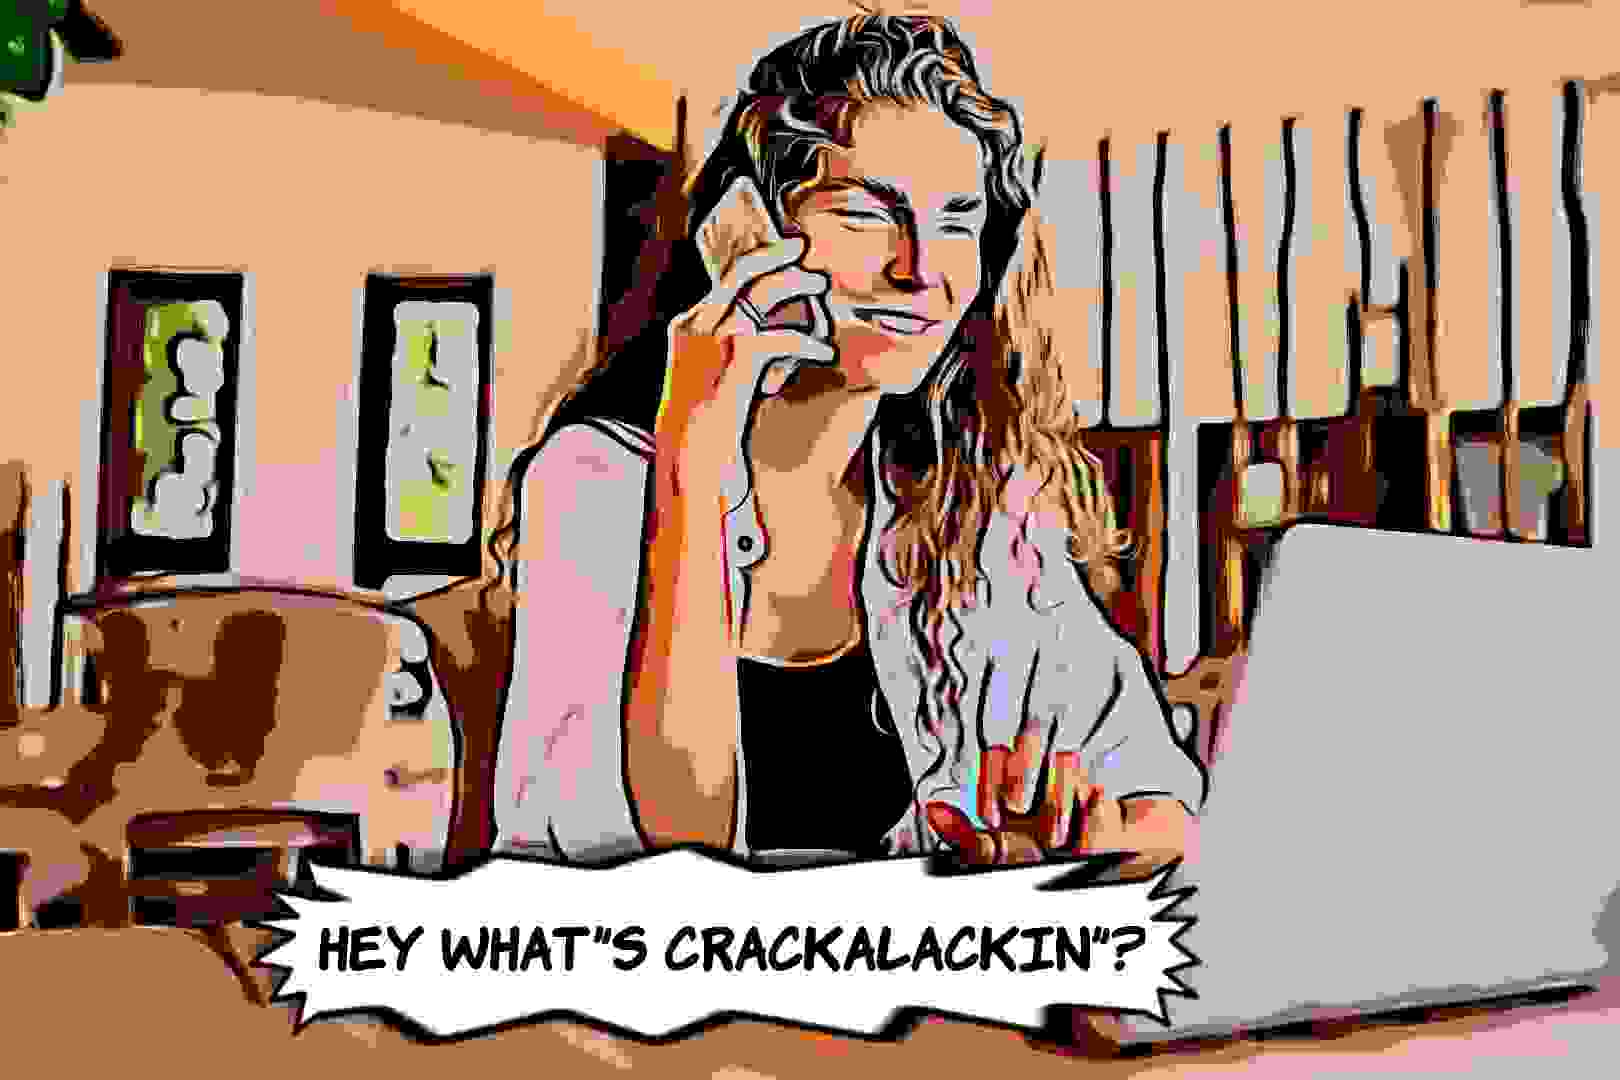 Best Responses To What's Crackalackin?